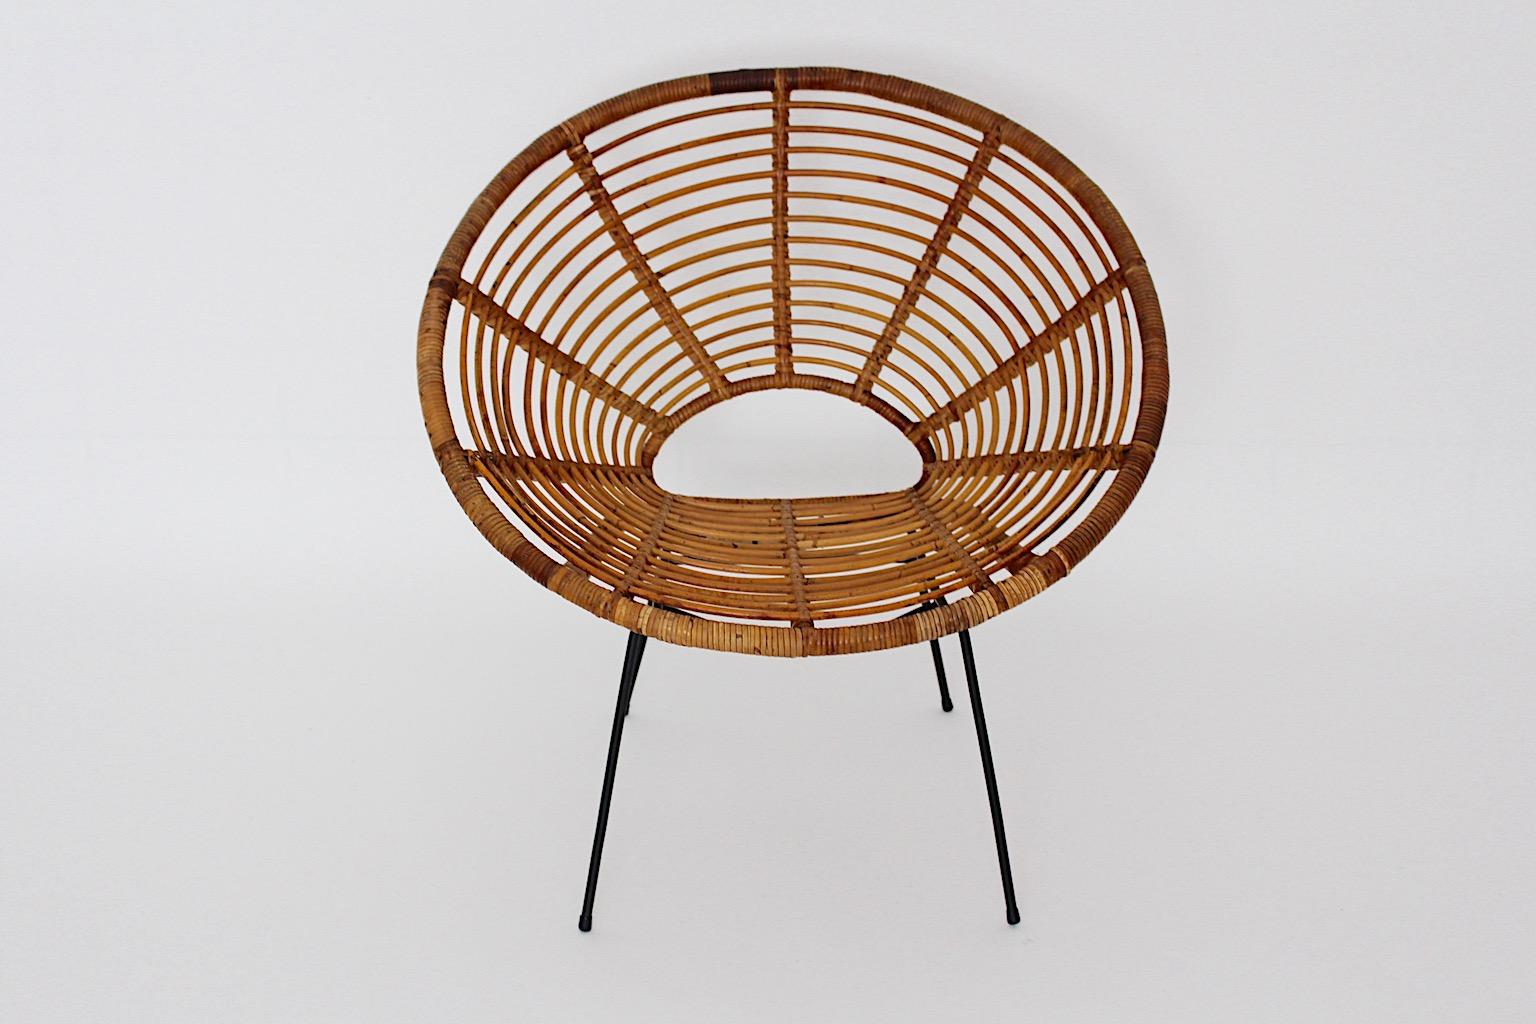 Organic rattan vintage four ( 4 ) dining chair patio chairs Riviera style France 1950s.
A fantastic set of four ( 4 ) rattan lounge chairs or dining chairs with a comfortable rattan seat shell and a stable black lacquered metal frame. 
The high